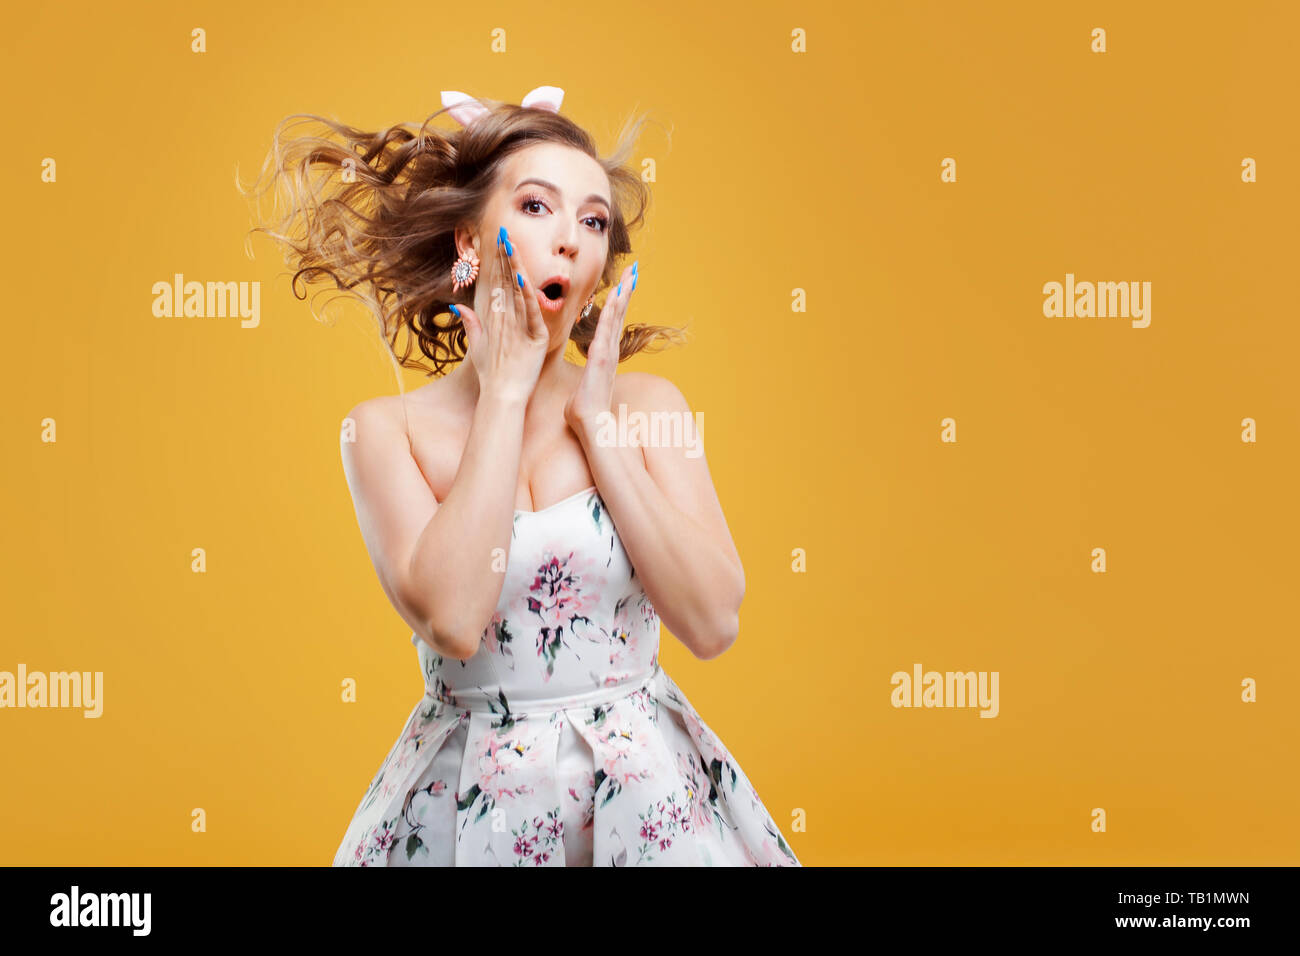 Wow super shock news, portrait of girl in pin up style. Enthusiastic young woman on a cheerful yellow background Stock Photo